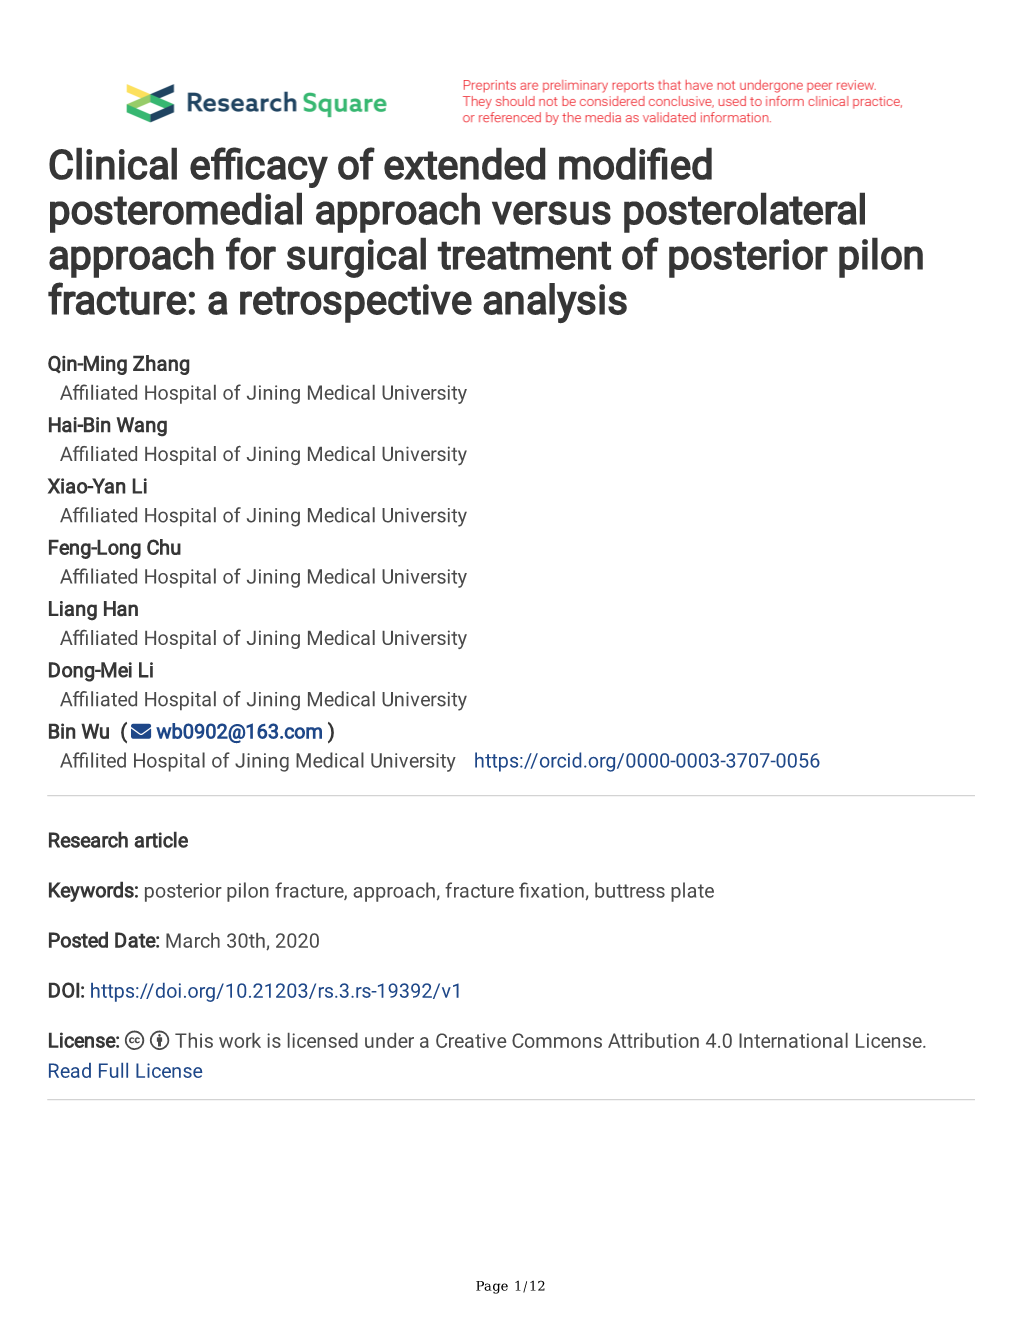 Clinical Efficacy of Extended Modified Posteromedial Approach Versus